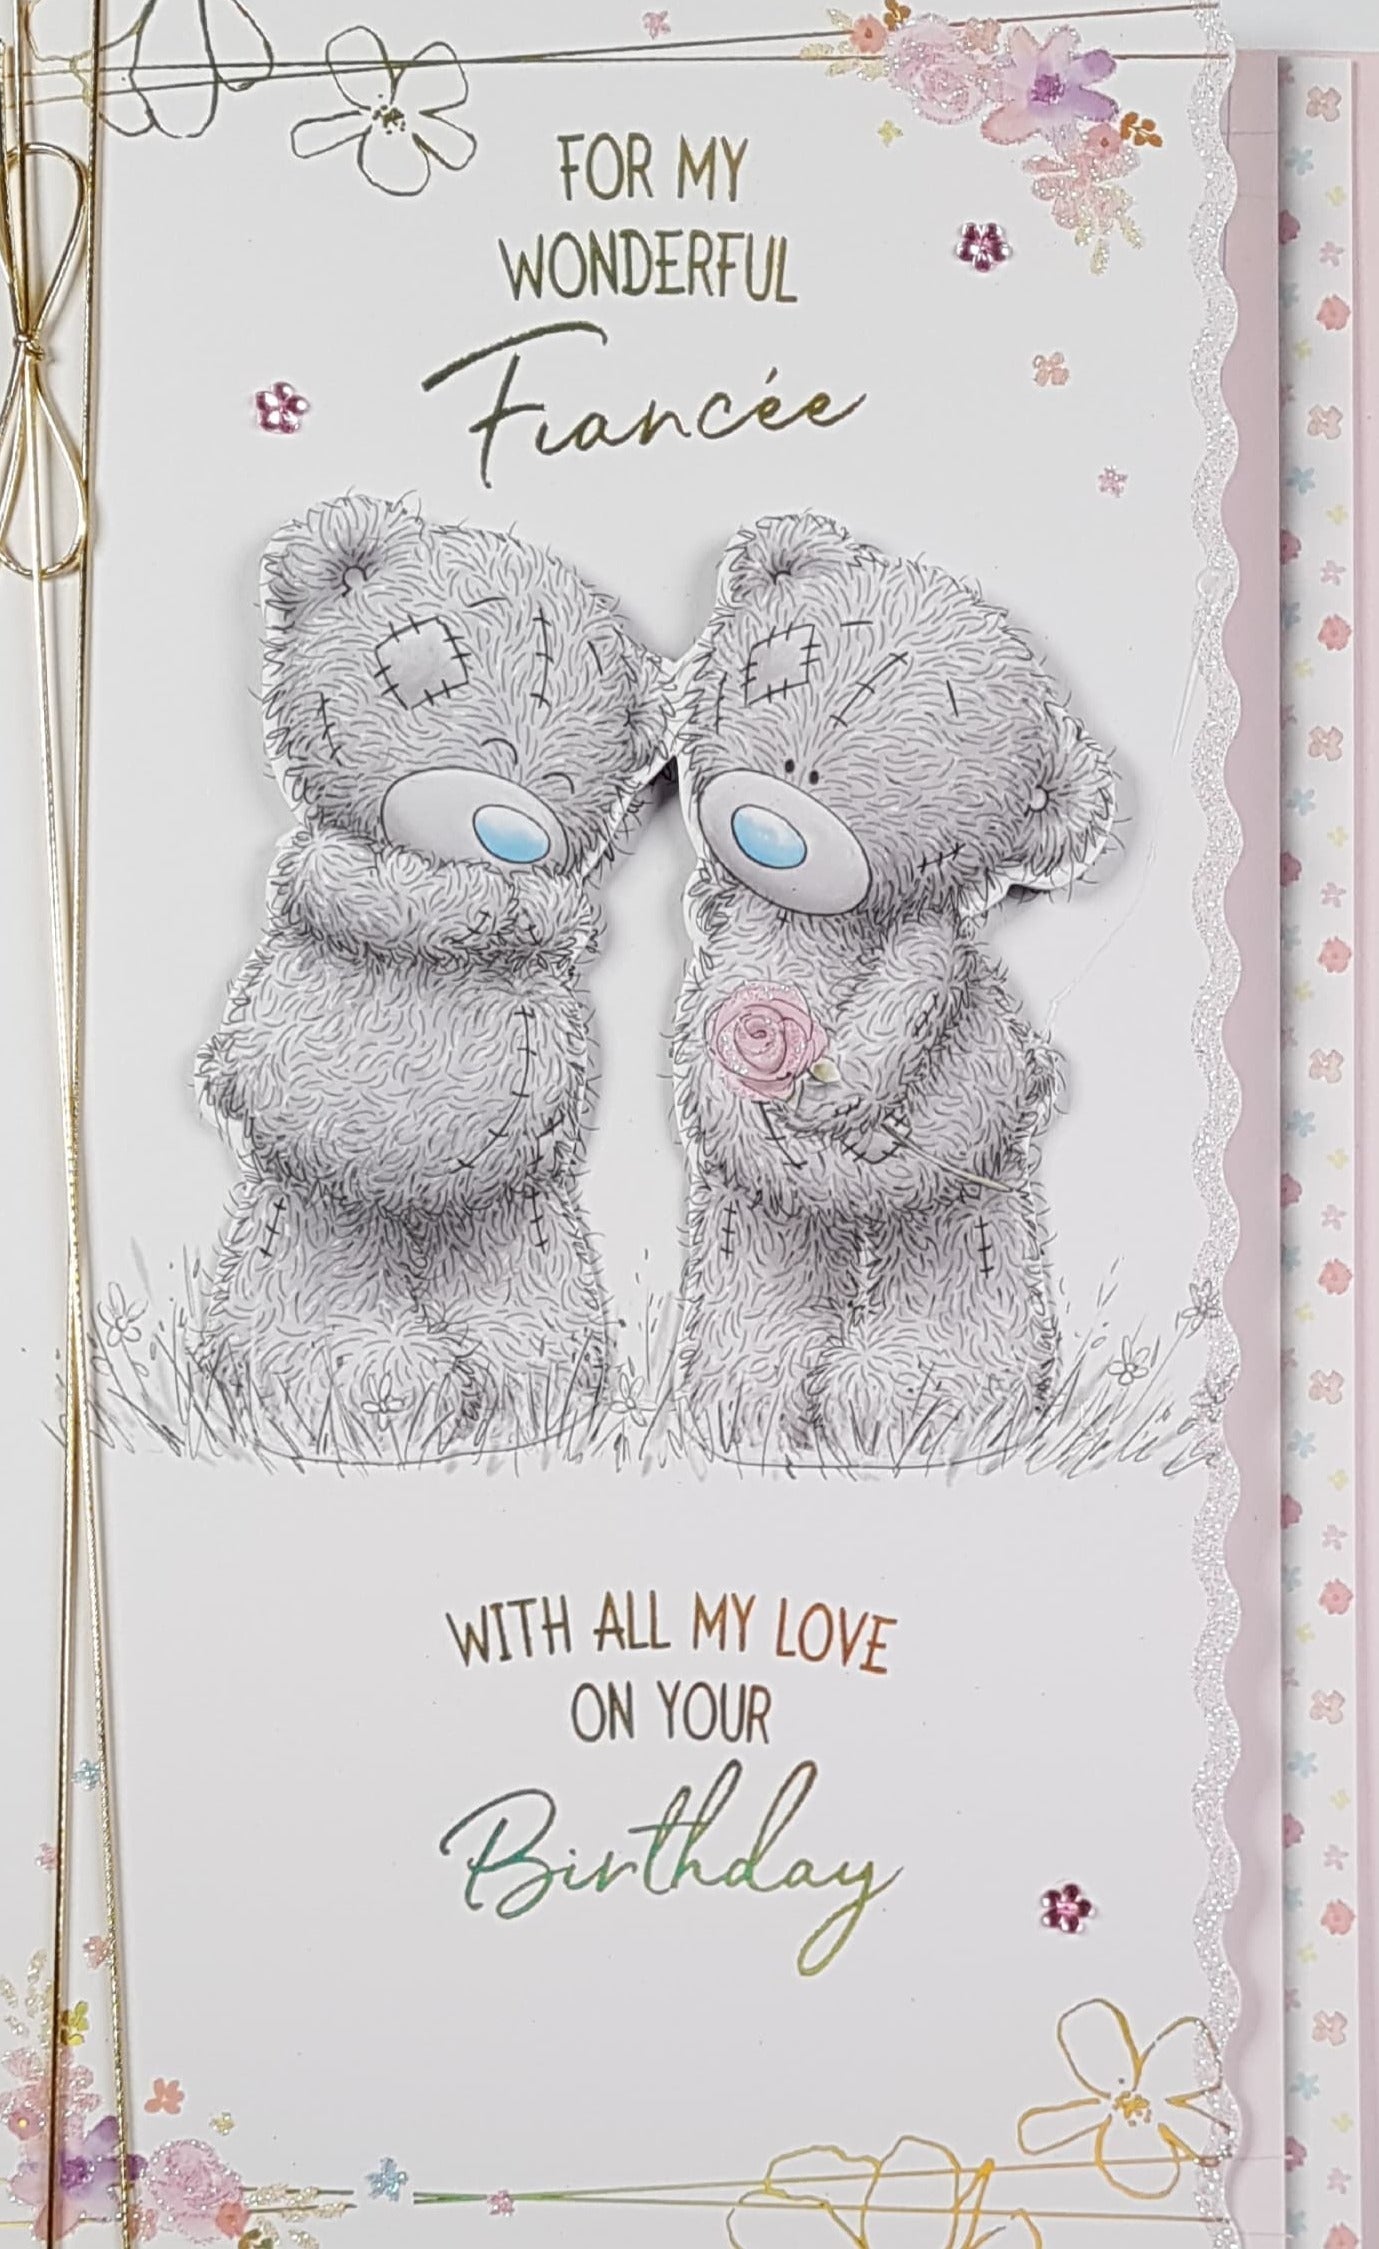 Birthday Card - Fiancee / Two Cute Teddy Bears Holding A Pink Rose